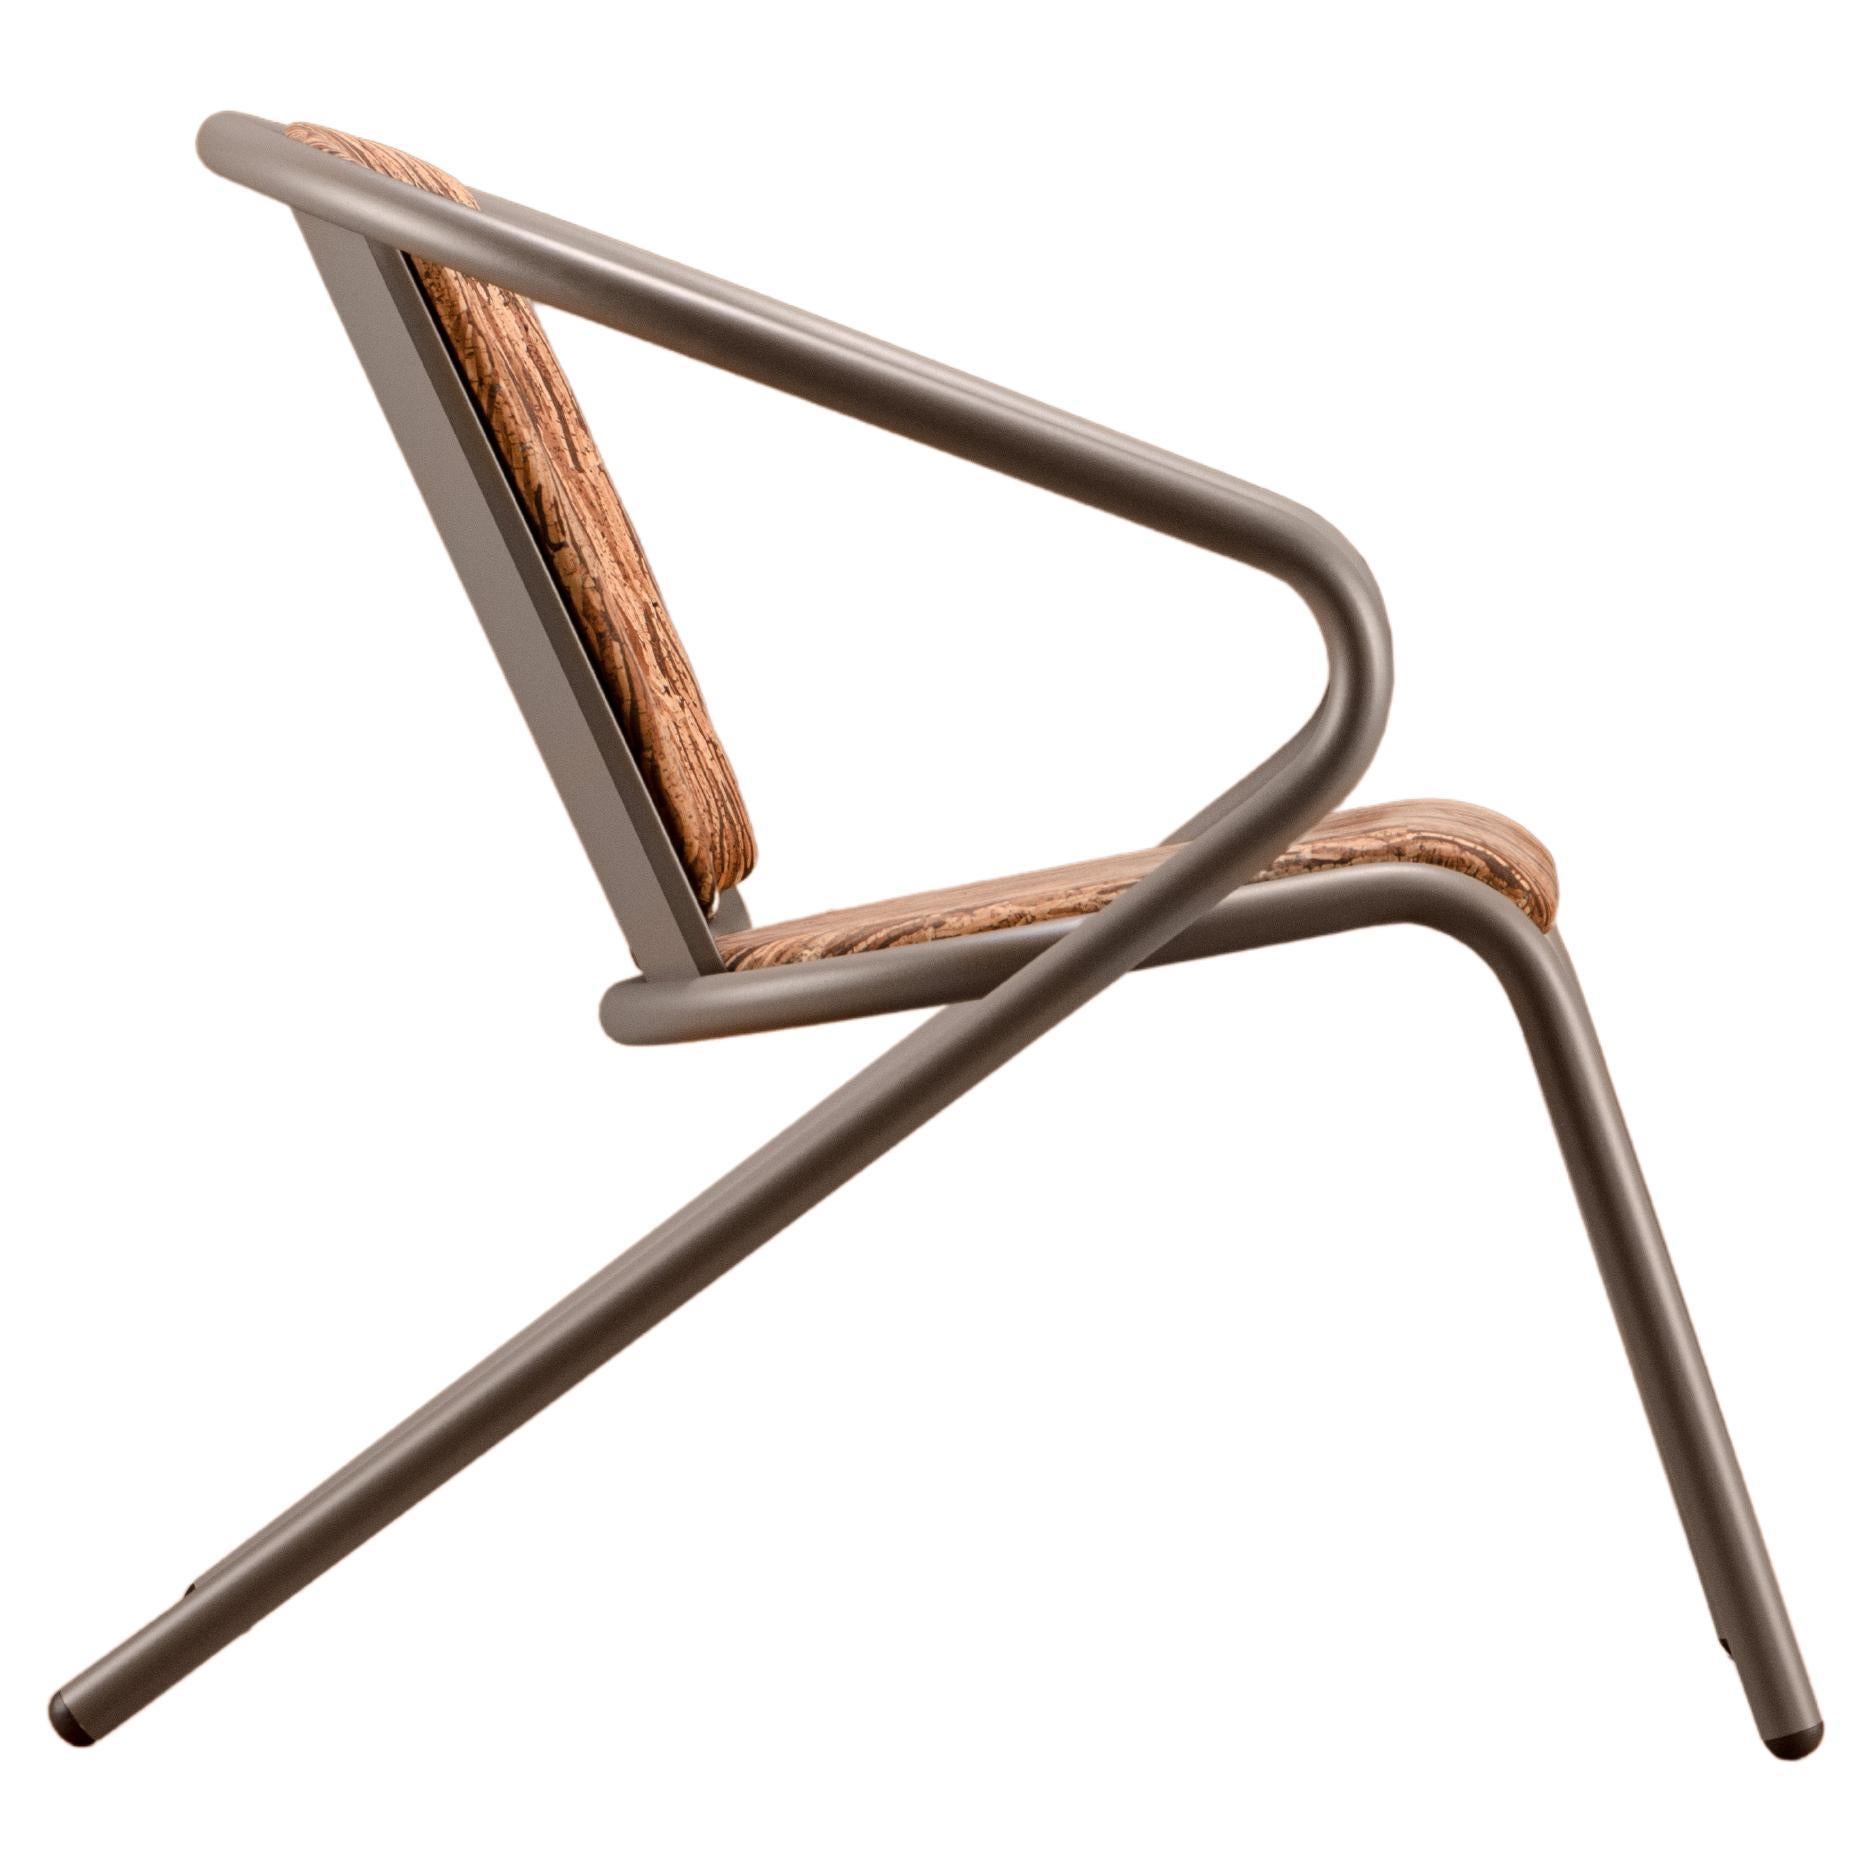 Bicalounge Modern Steel Lounge Chair Oxidized Bark, Upholstery in Natural Cork